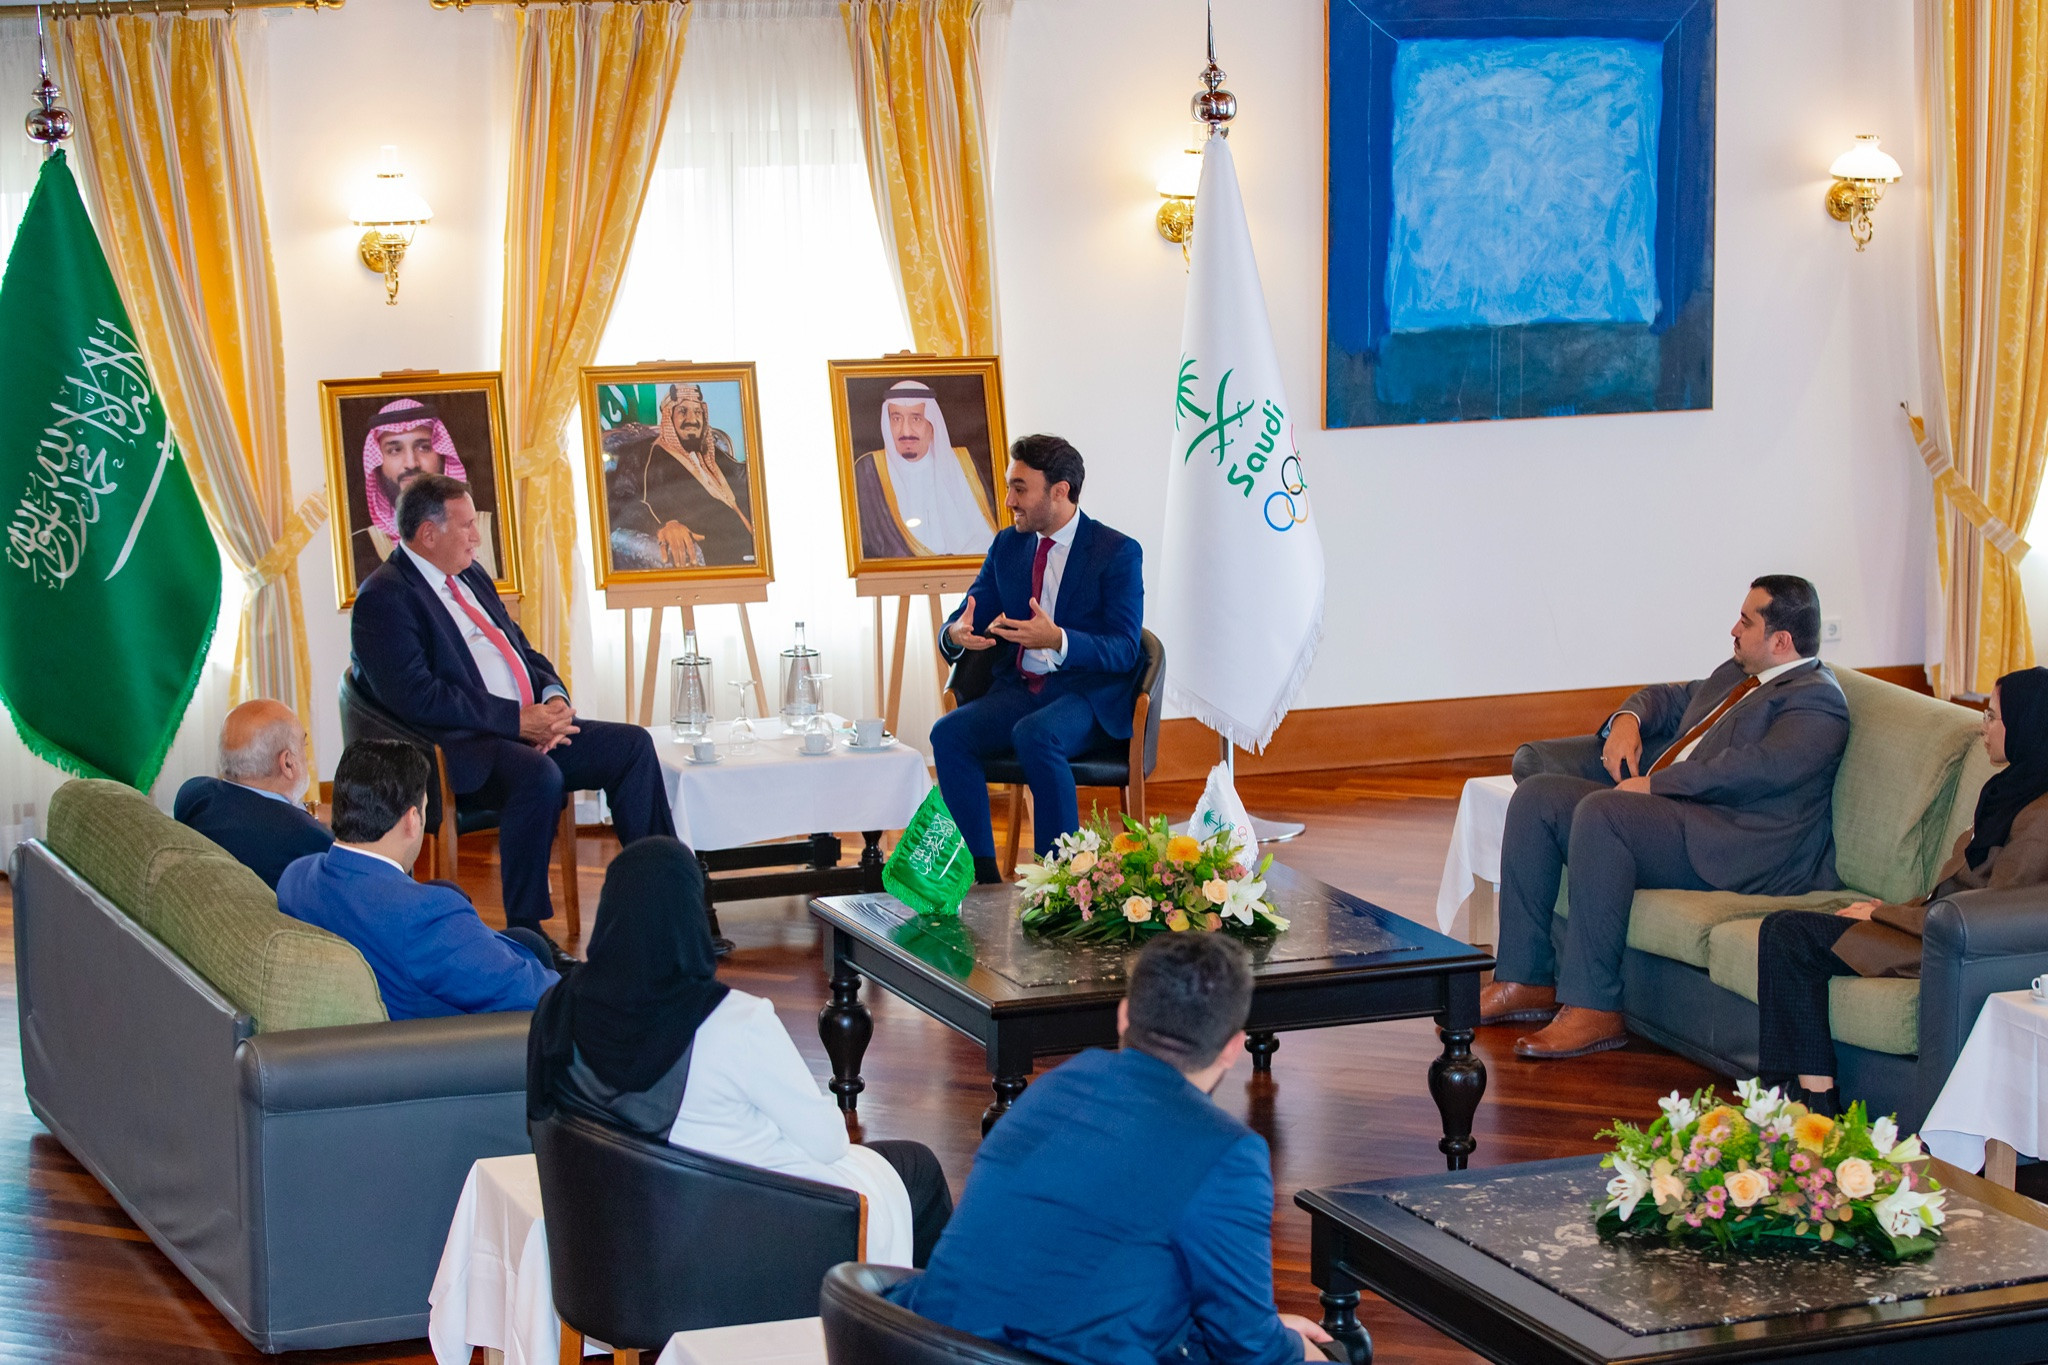 EOC President Sypros Capralos met officials from the Saudi Arabia Olympic Committee on the sidelines of the Assembly ©SAOC/Twitter